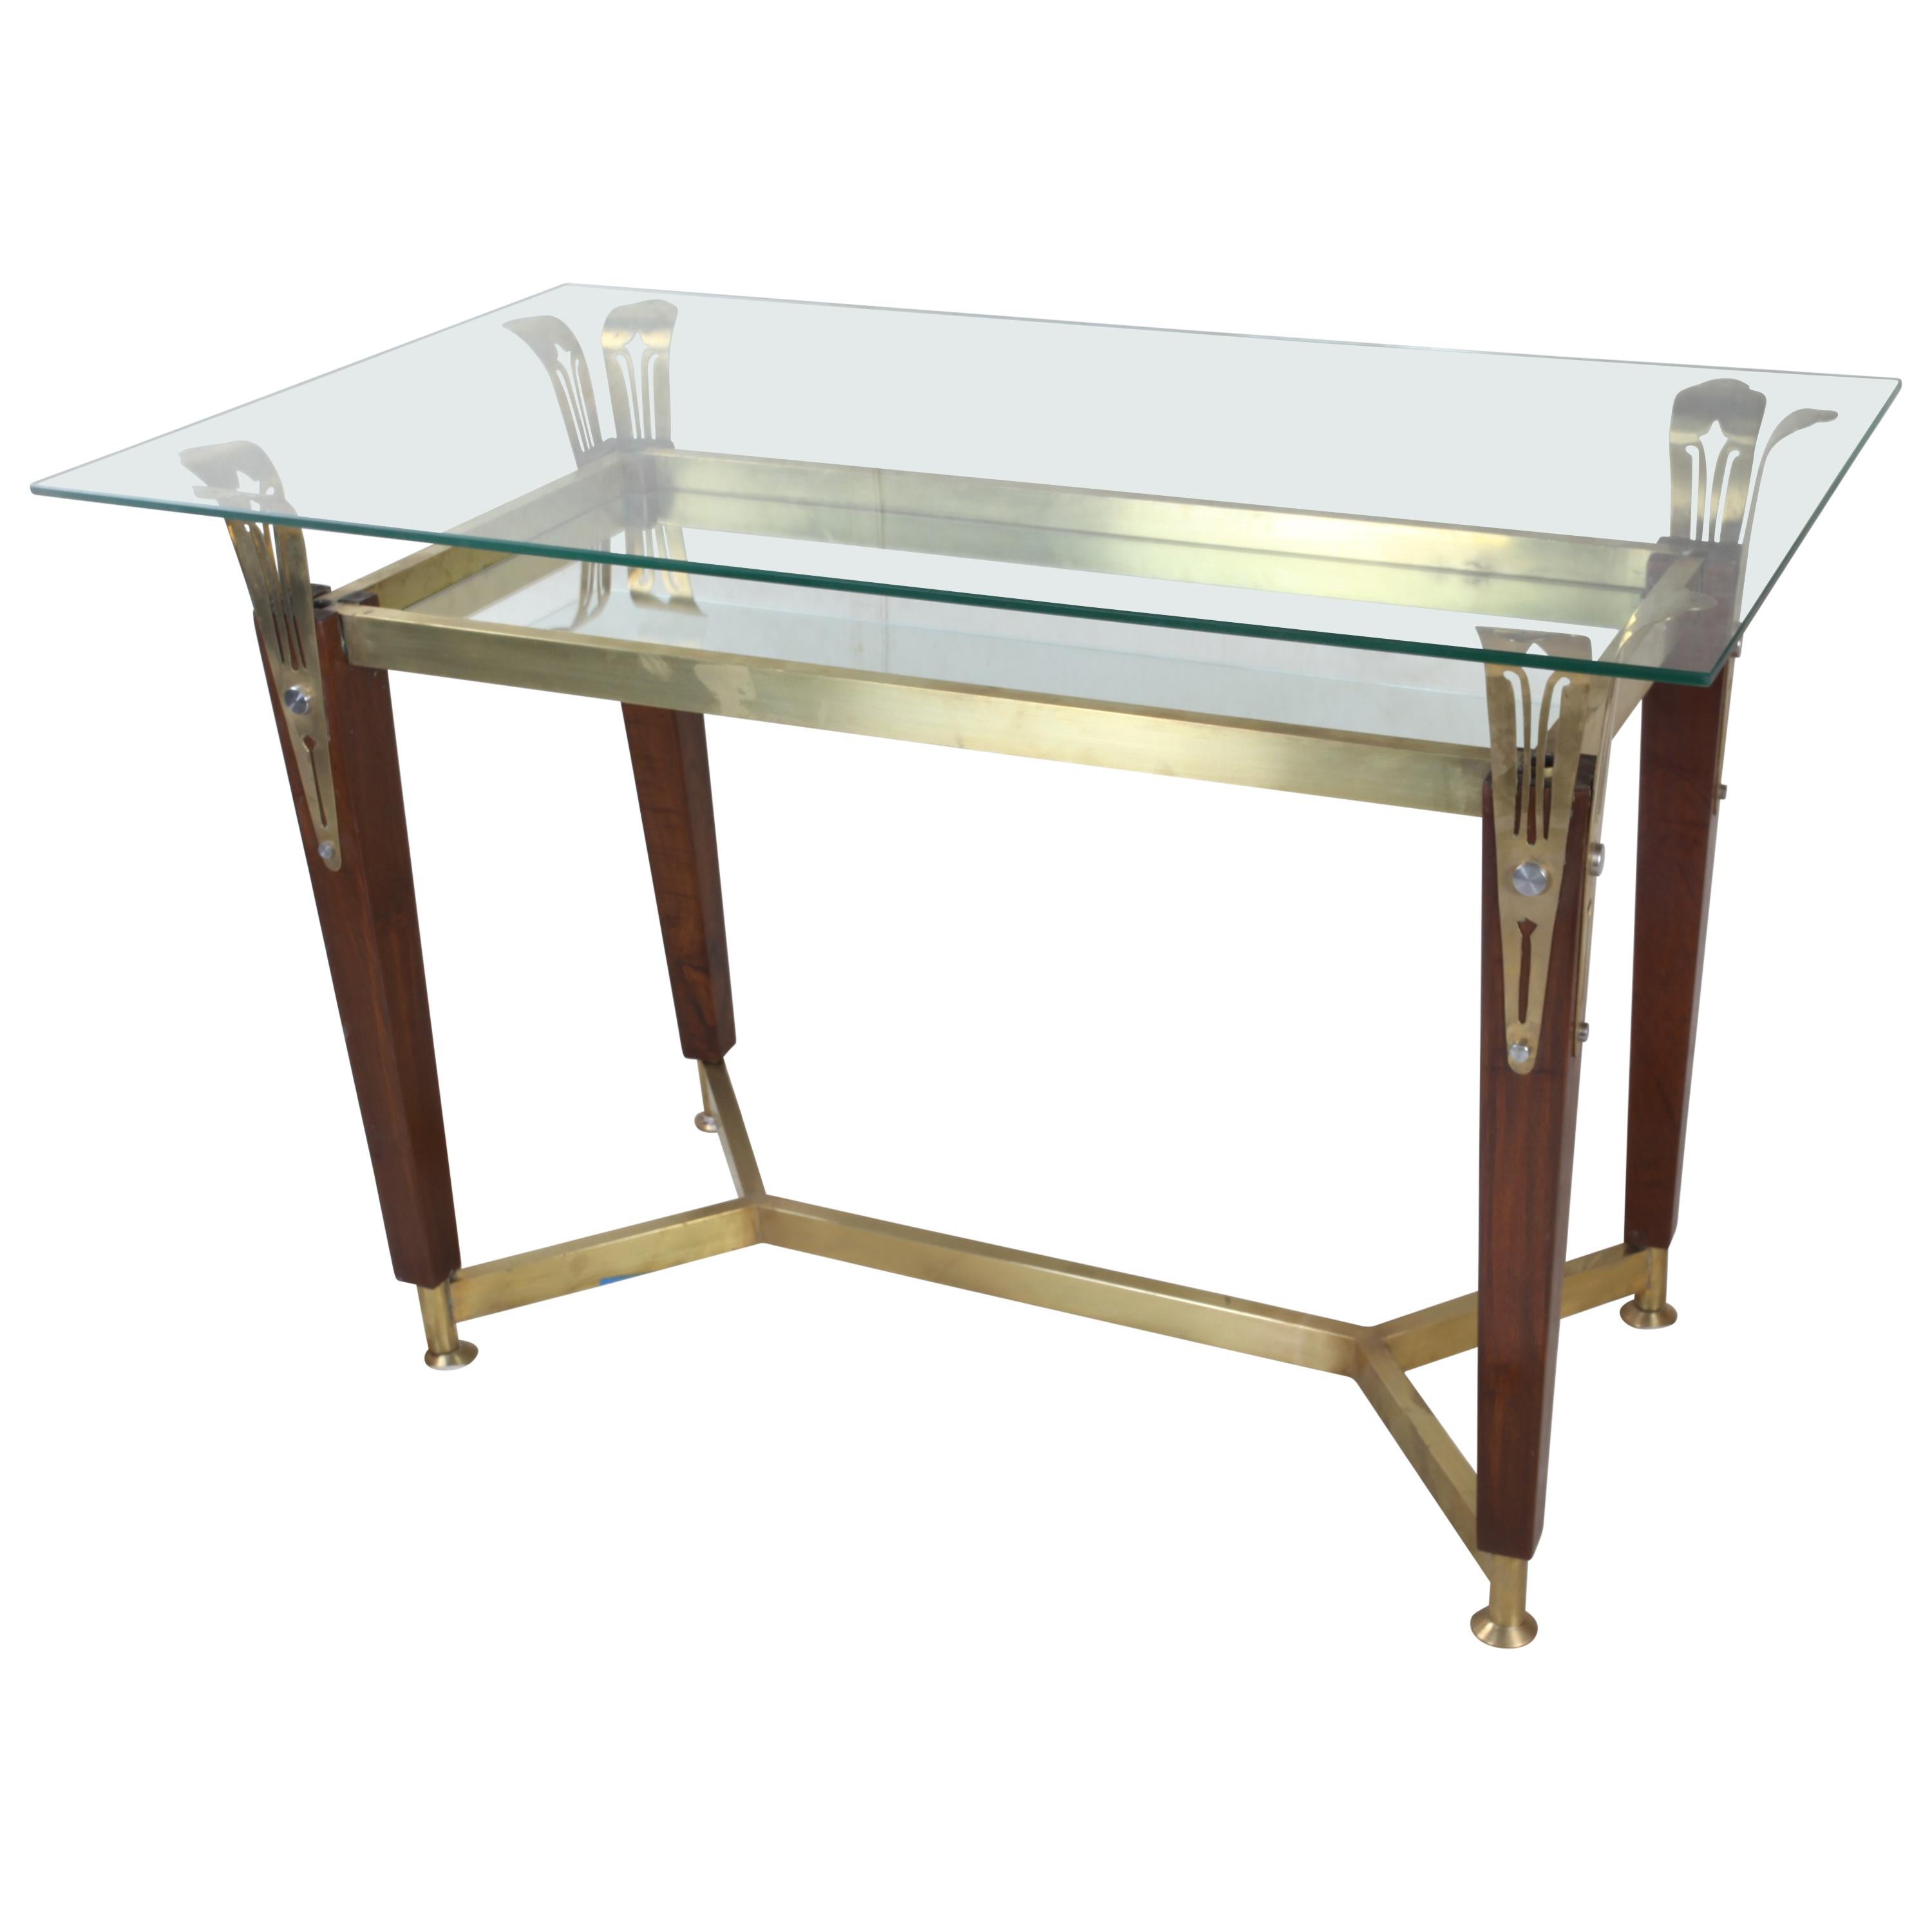 Hollywood Regency Teak, Brass and Glass Console Table or Desk